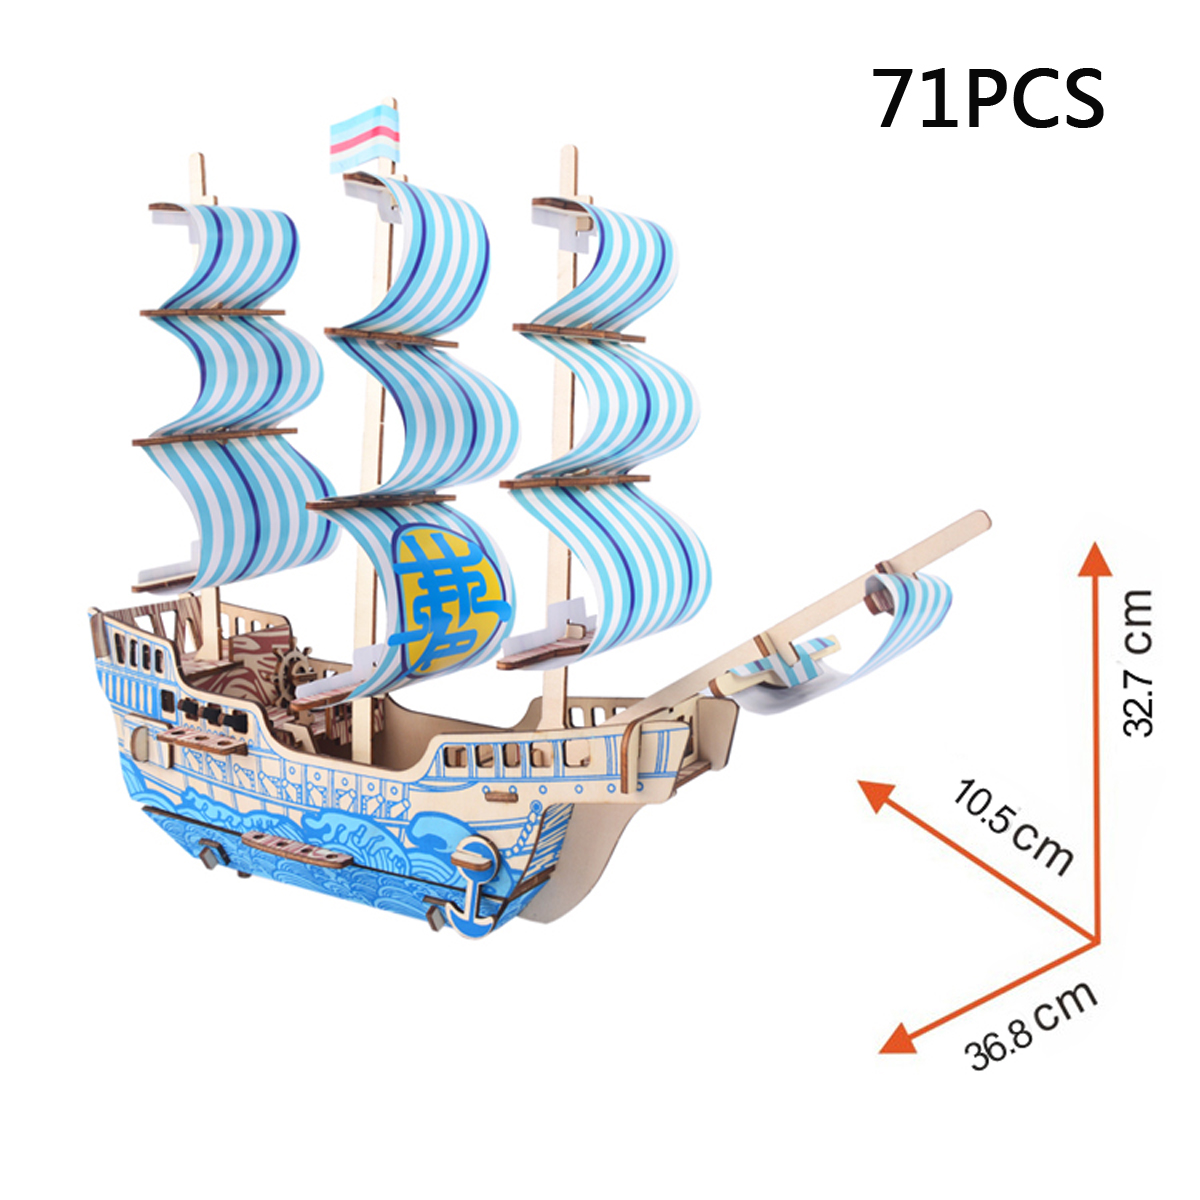 3D-Woodcraft-Assembly-Sailing-Series-Kit-Jigsaw-Puzzle-Decoration-Toy-Model-for-Kids-Gift-1635638-8